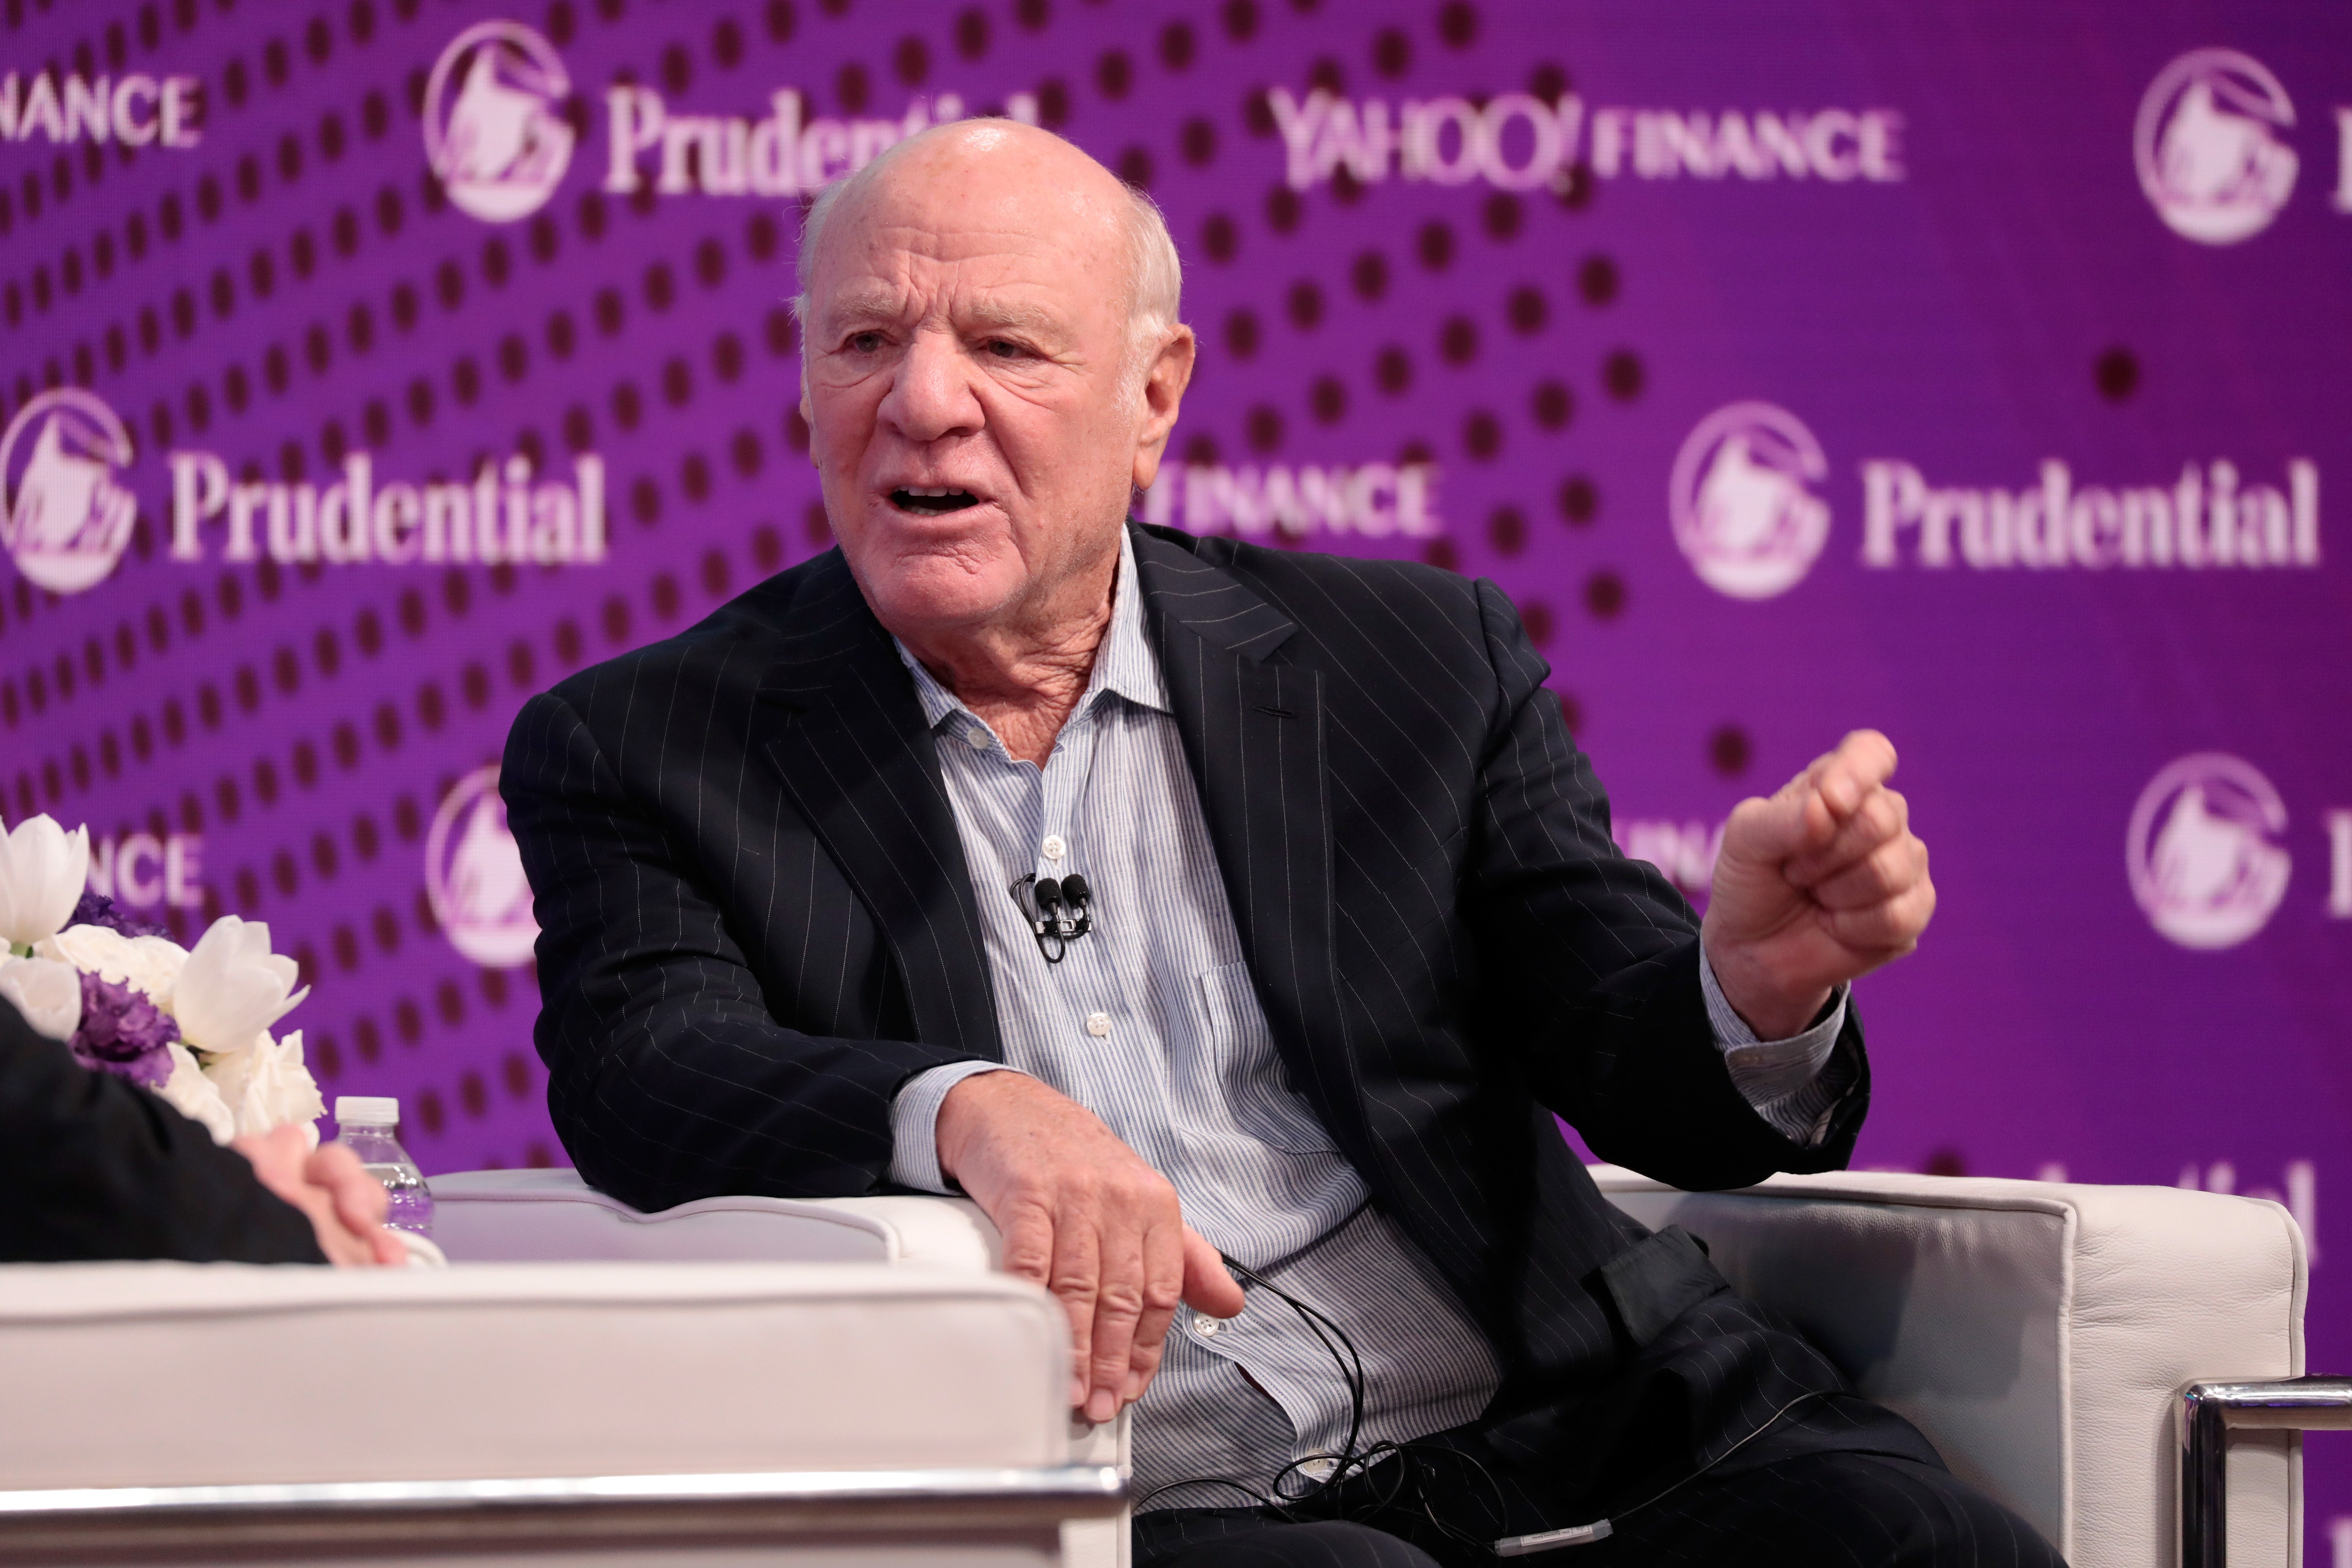 Media mogul Barry Diller is reportedly trying to acquire the largest shareholder in Paramount, which would give him control of the legacy studio.